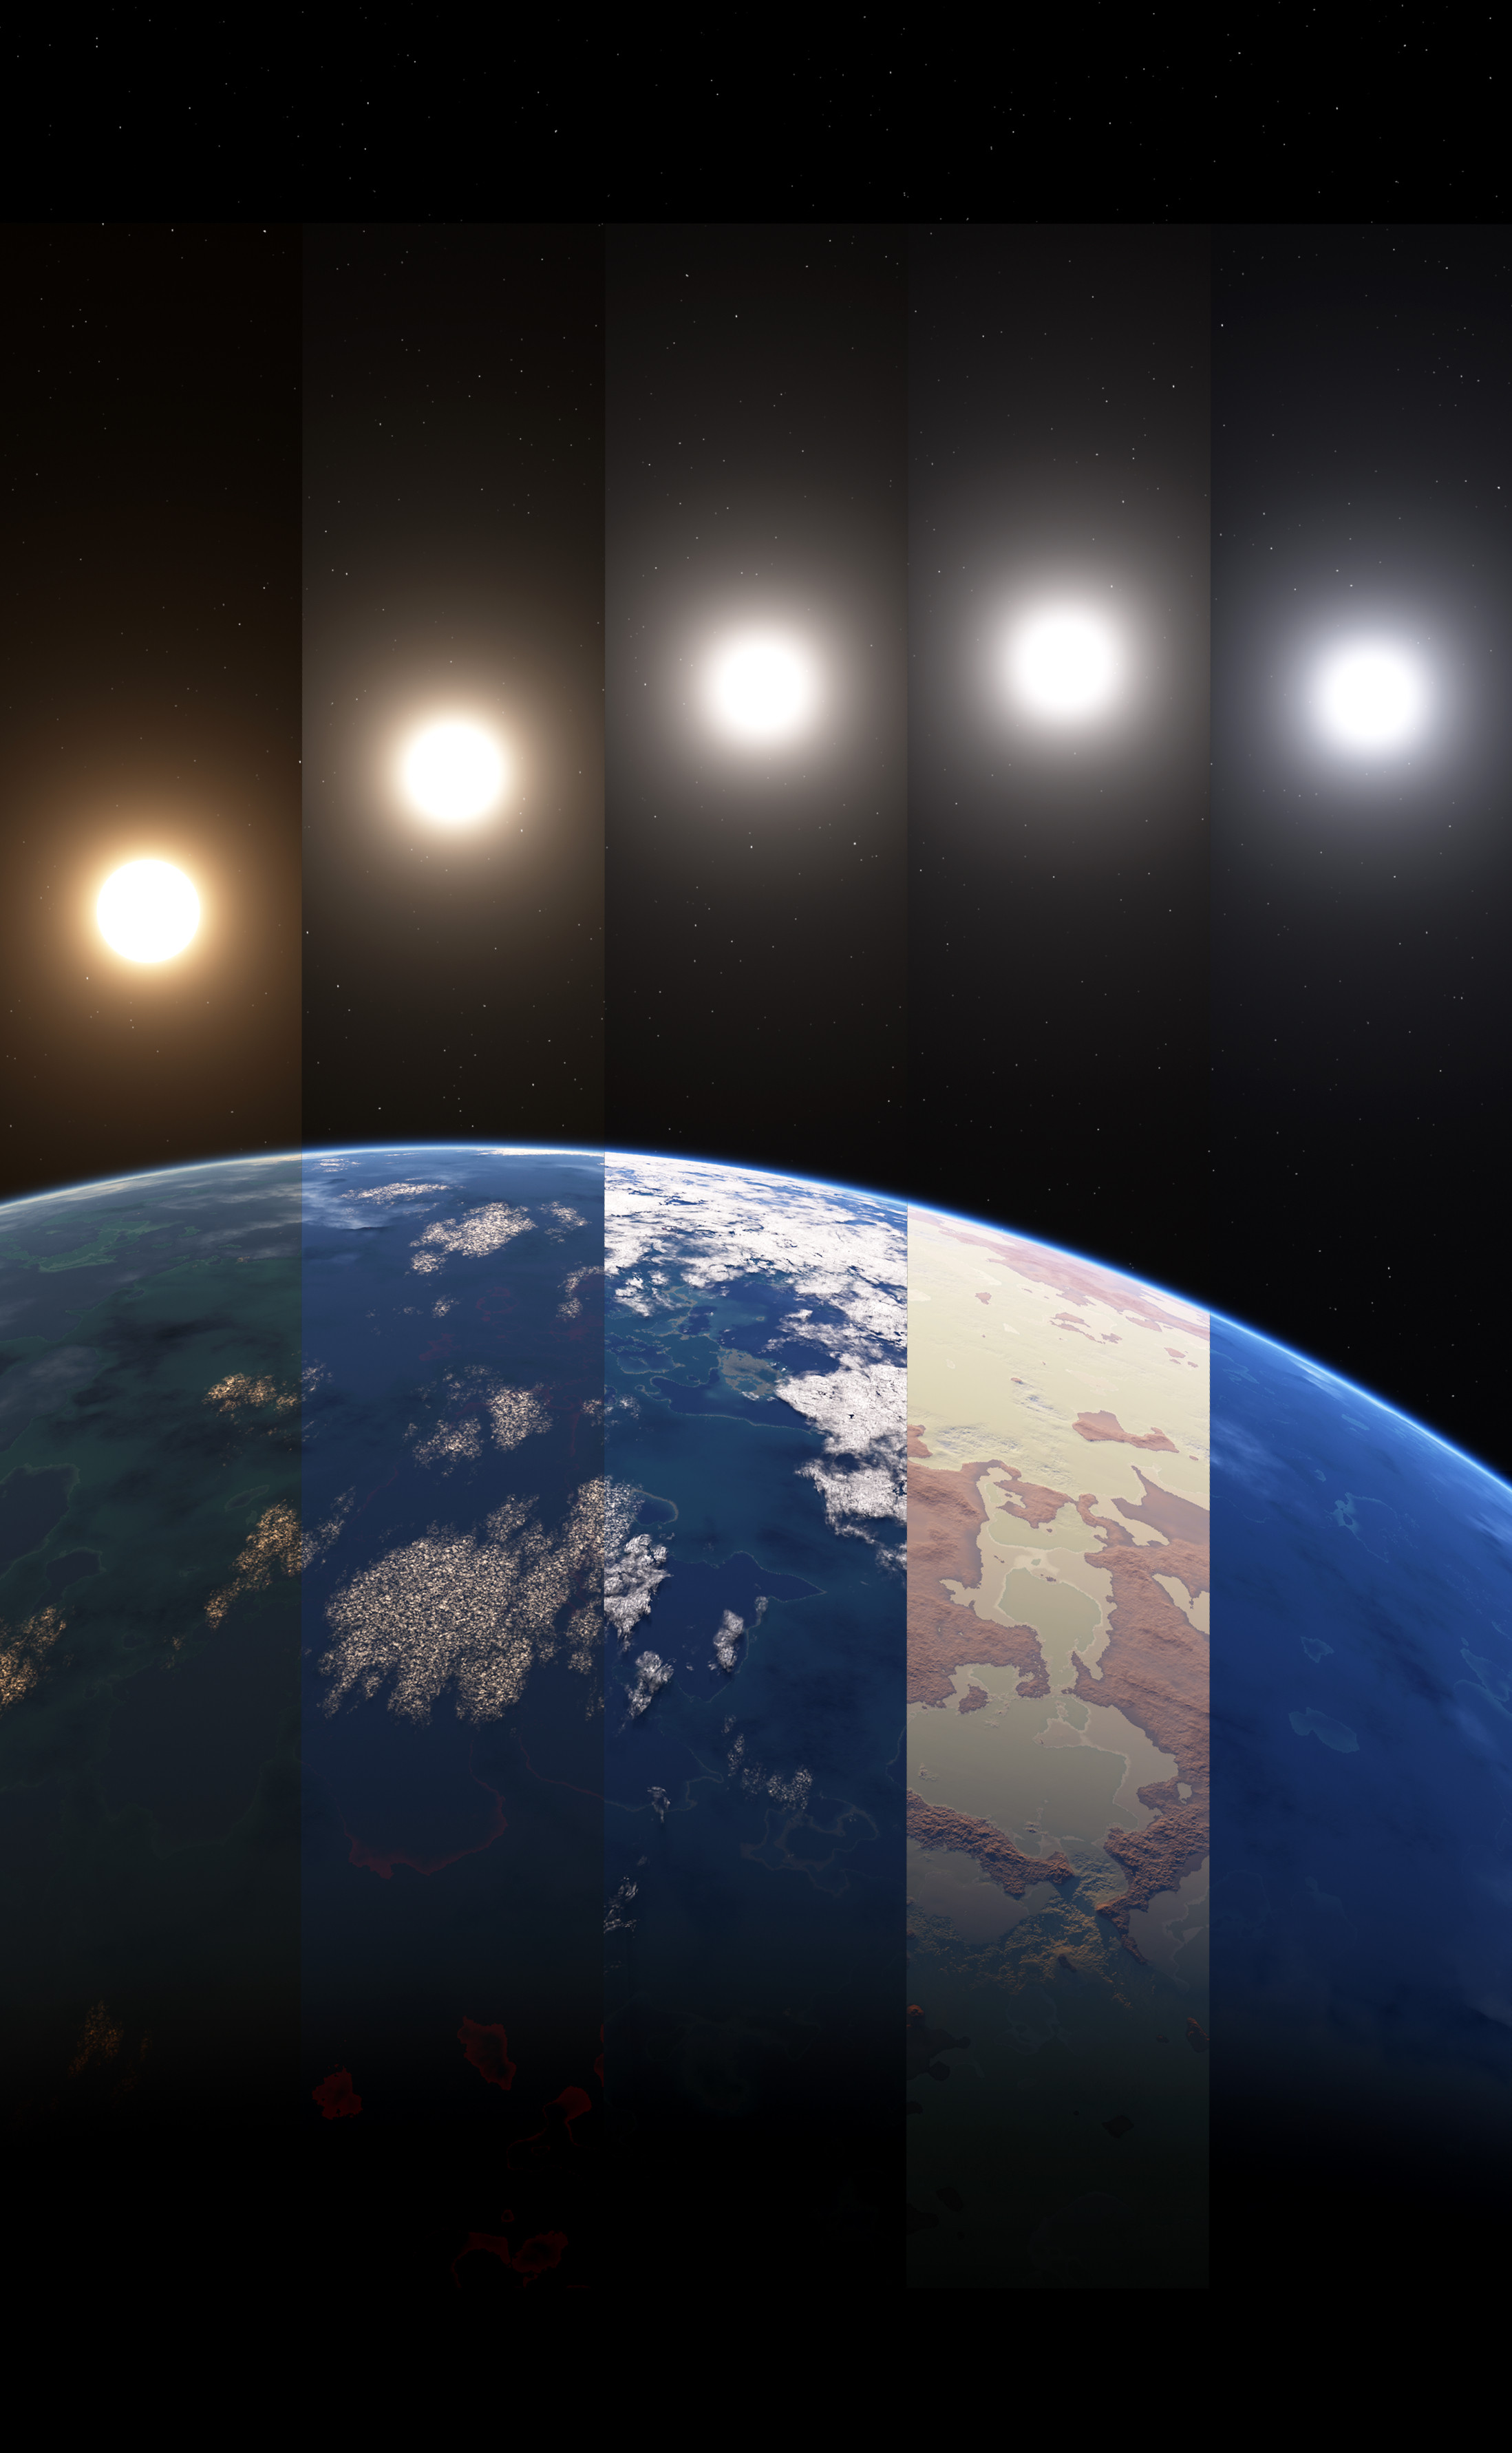 Left to right: Forest, Basalt, Earth-like, Desert, and Ocean. Each gets progressively warmer from left to right due to changing star type. 